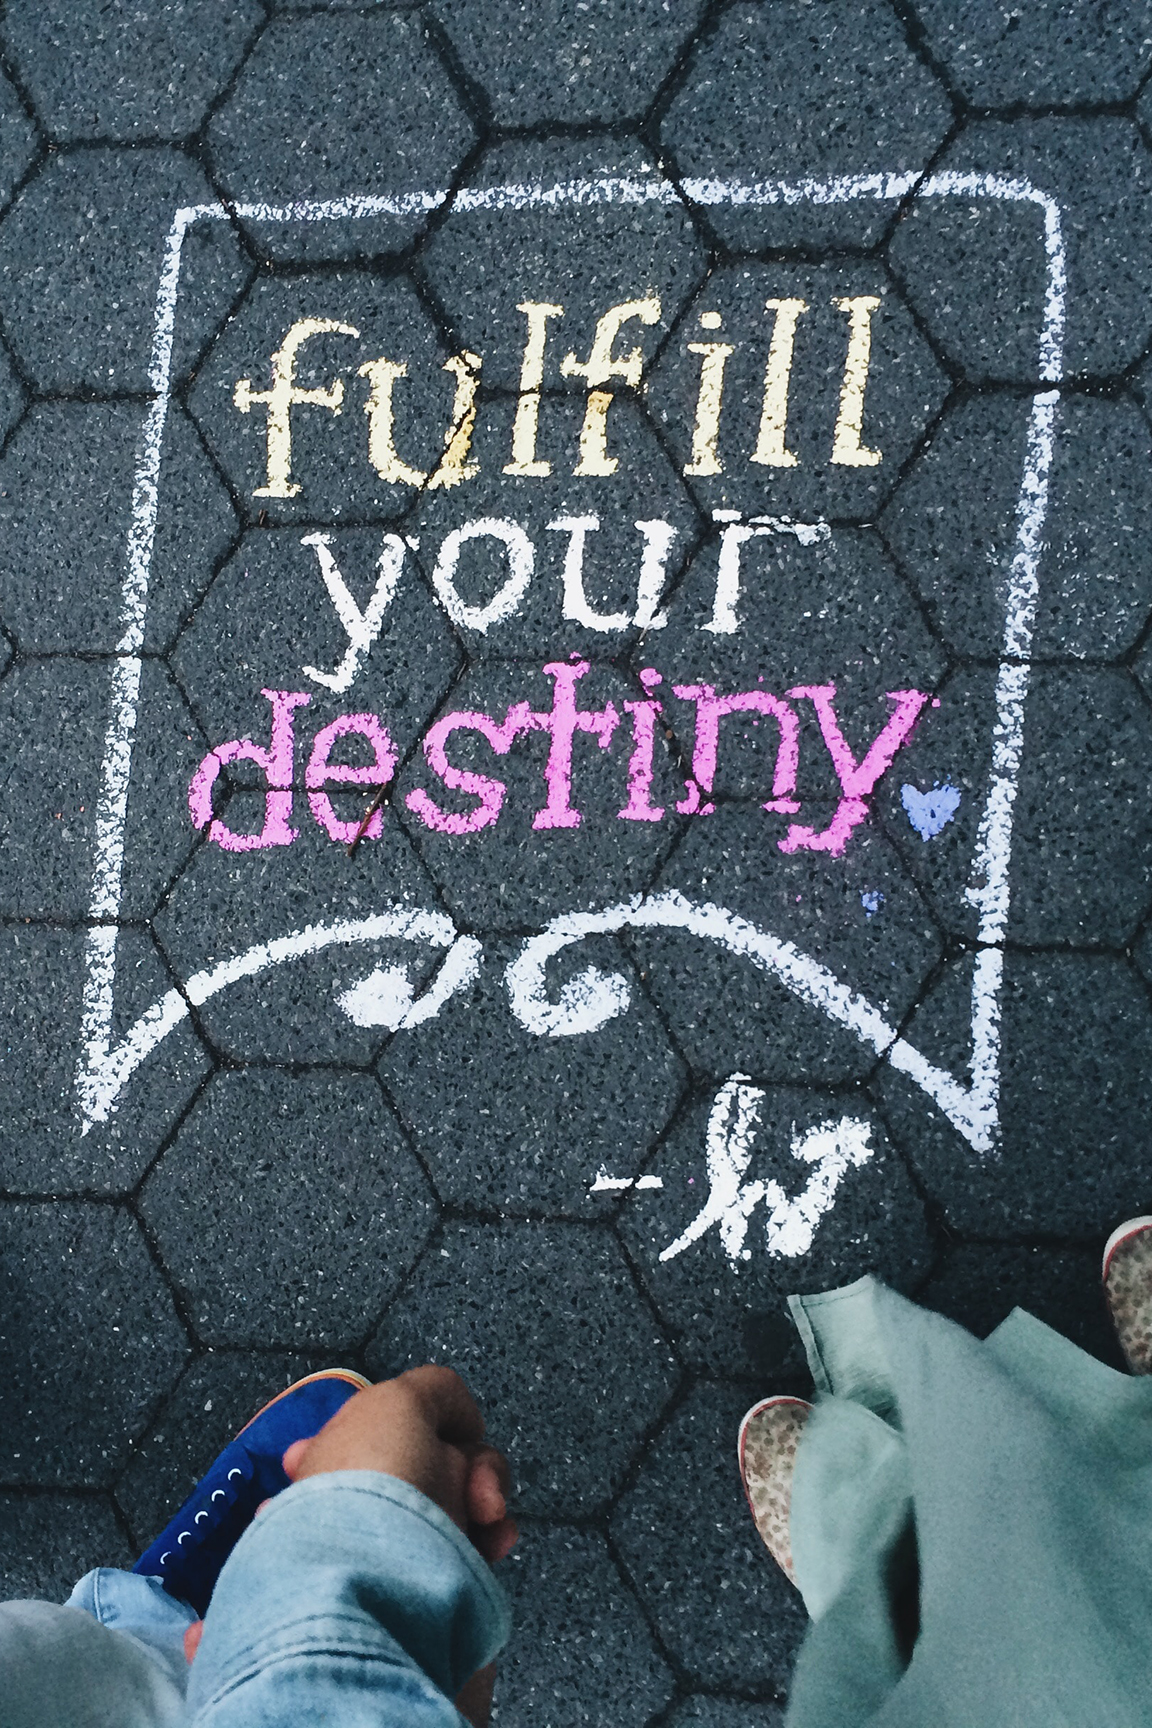 Fulfill your destiny written on the floor with two pair of feet next to it